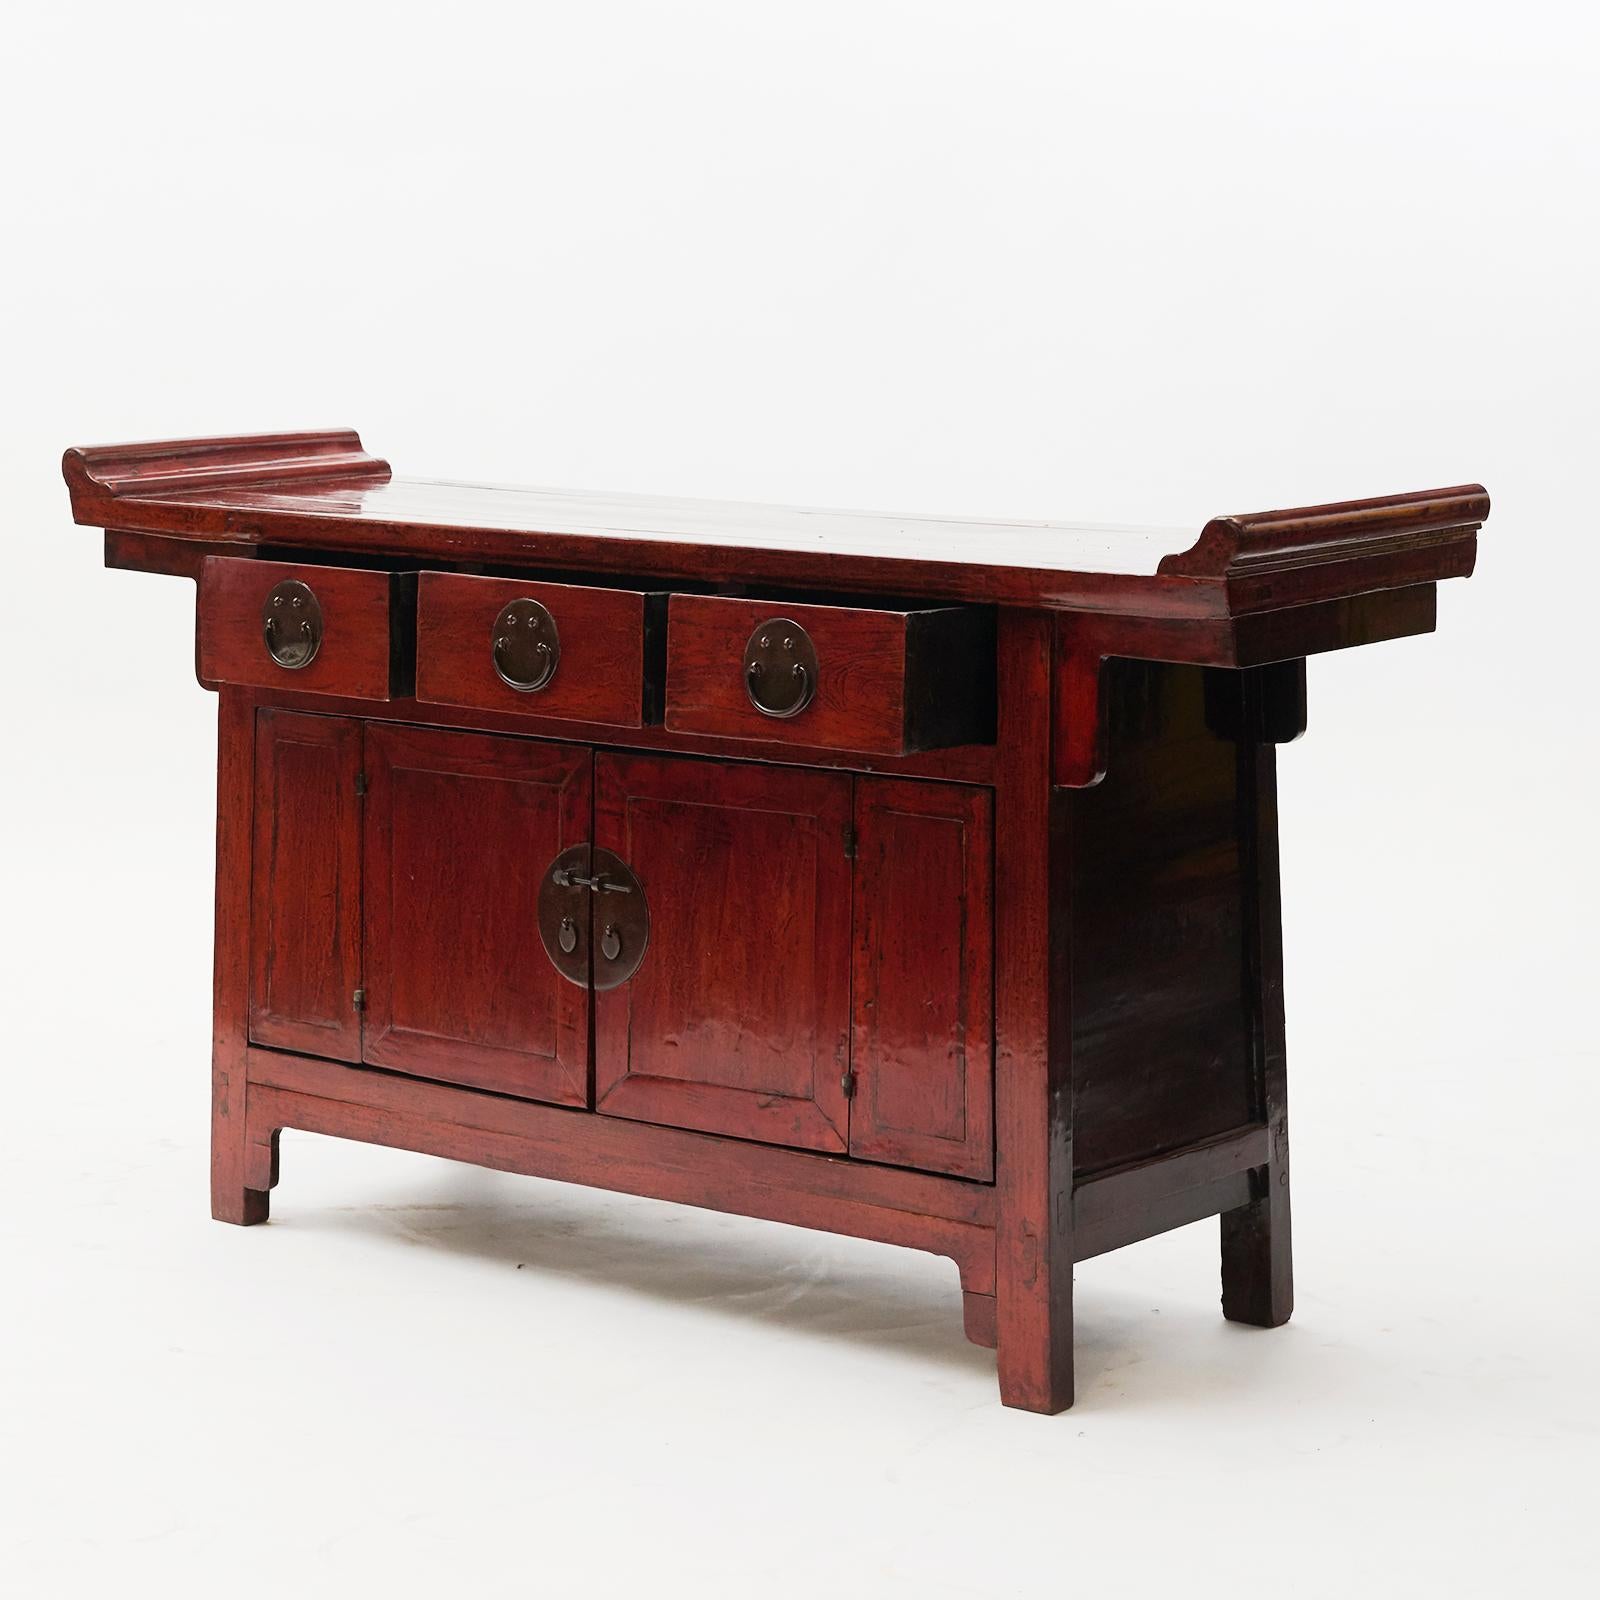 Alter sideboard (also called Beijing sideboard), original red varnish, beautiful patina. 3 drawers, pair of doors (side to doors can be opened). From the Shanxi Province, 1840-1860. Ming style.